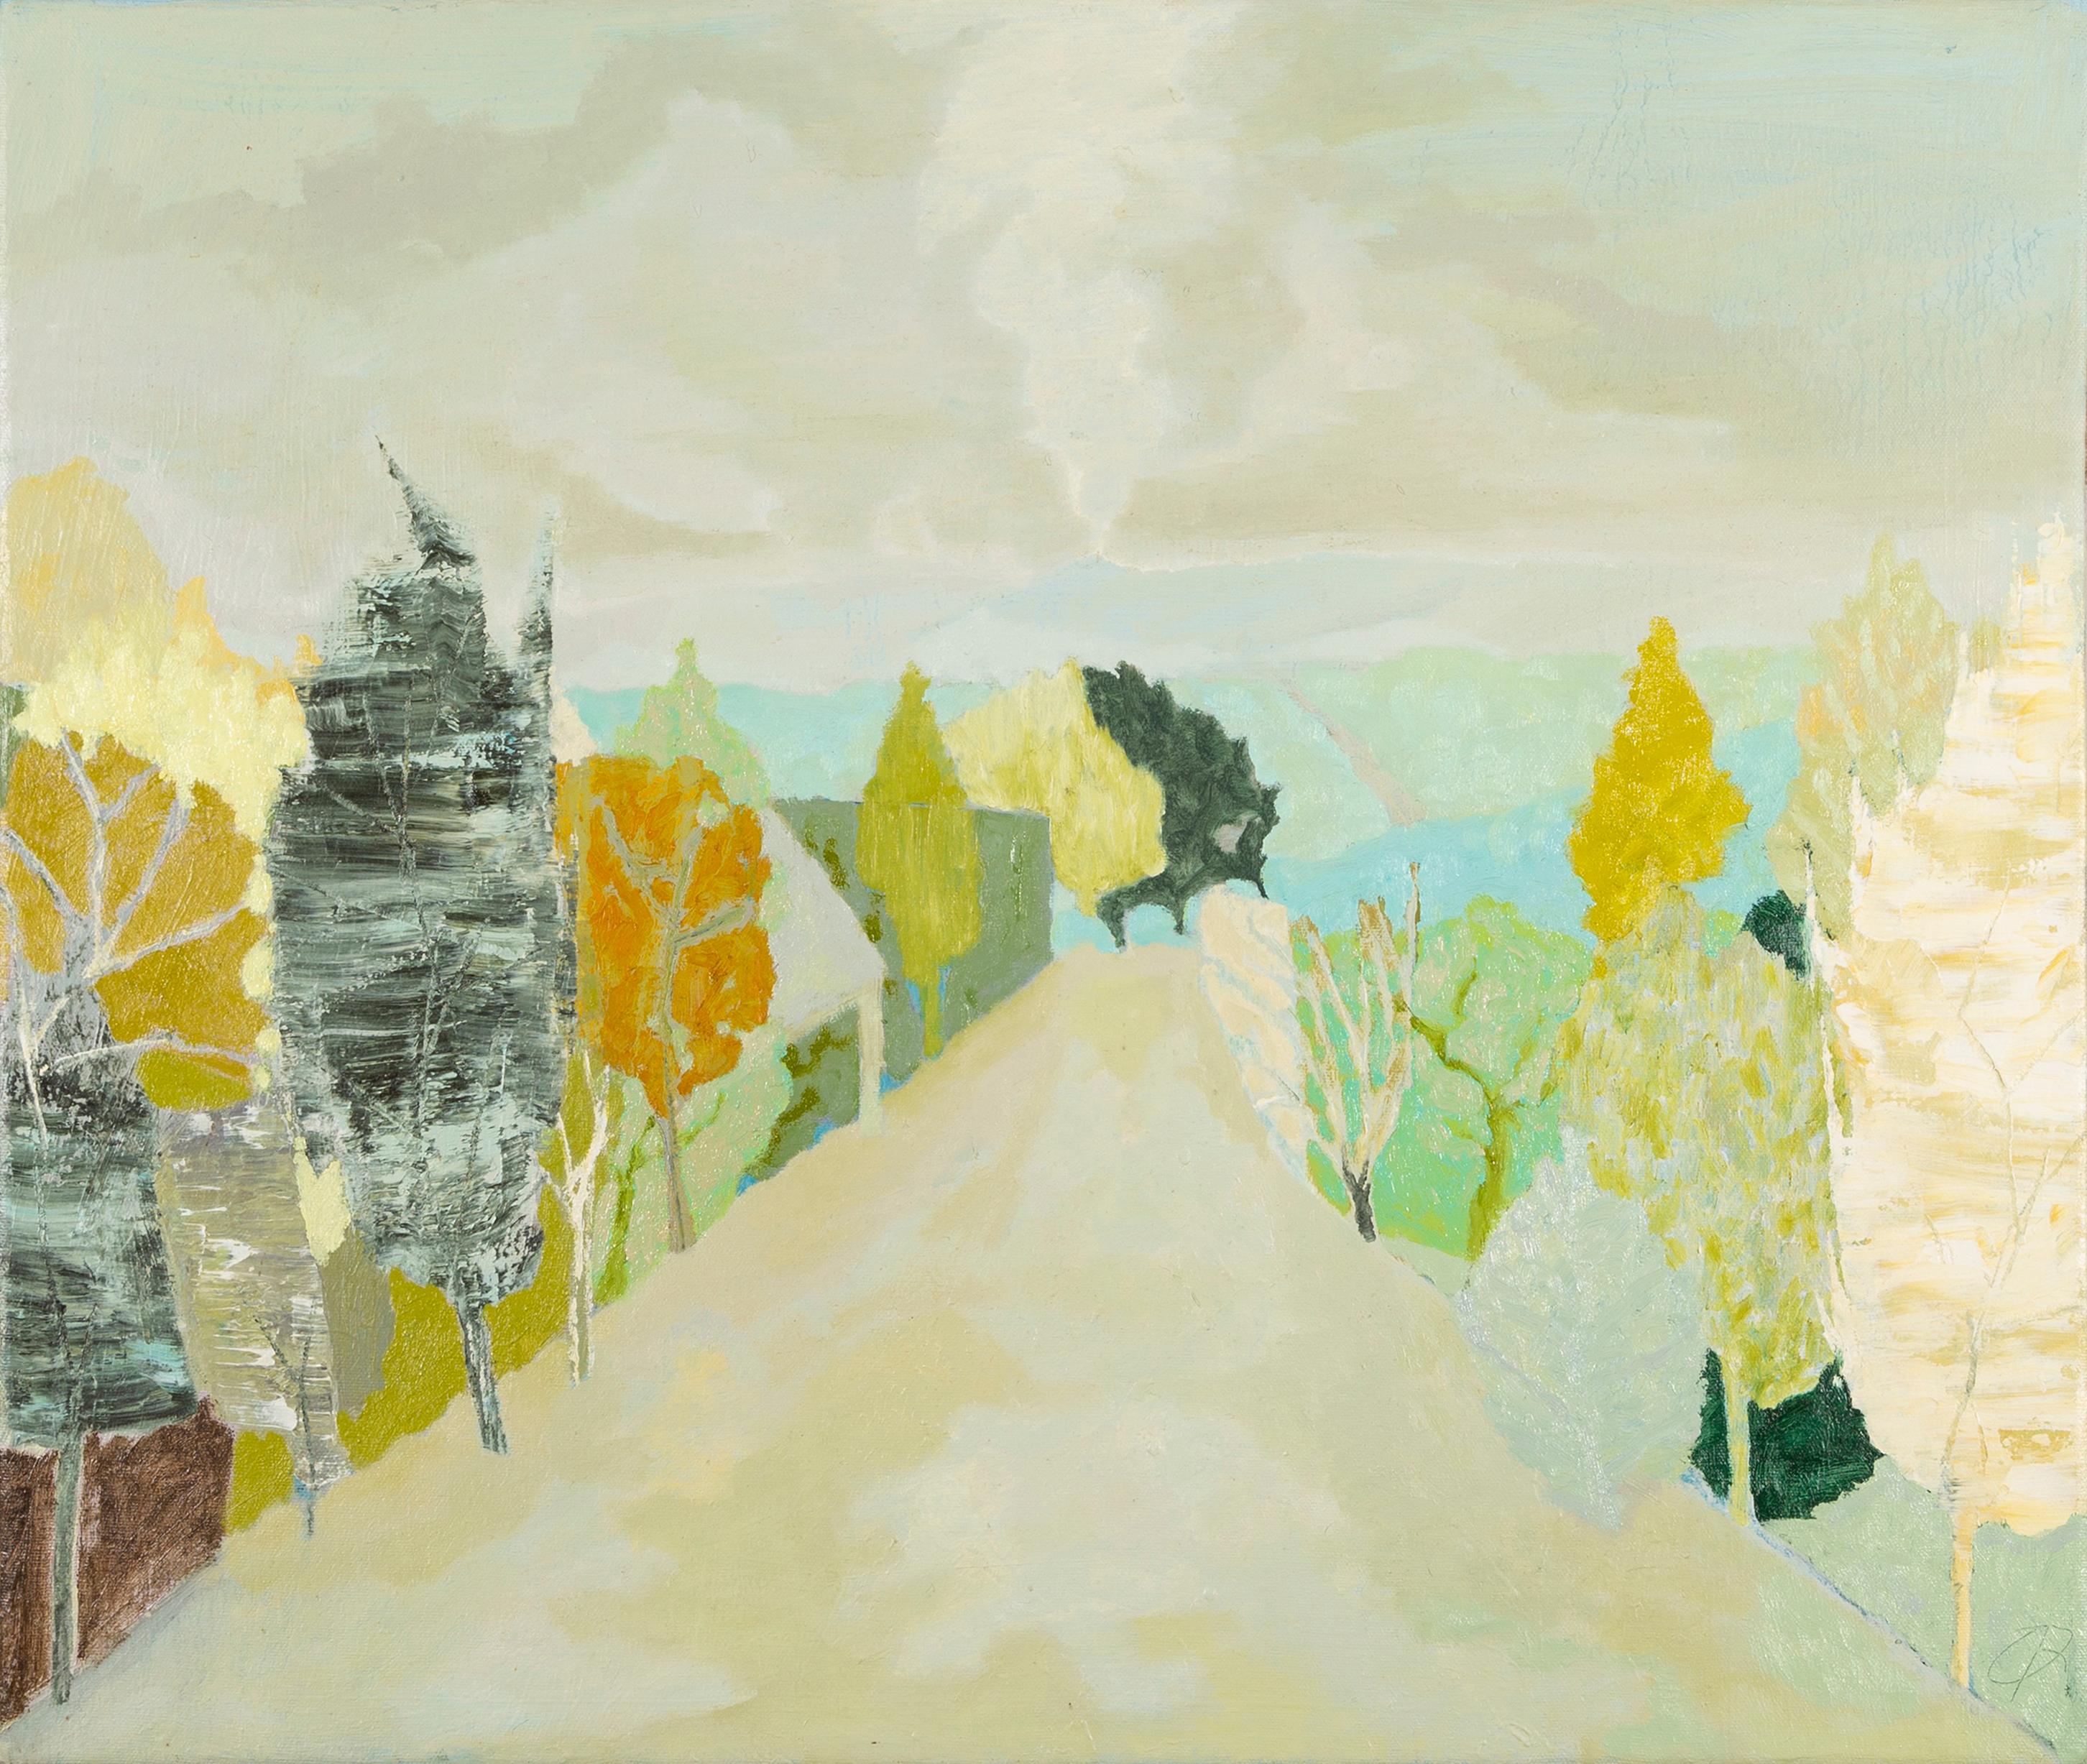 Avenue - landscape painting with trees, contemporary art, grey and blue - Mixed Media Art by Richard Ballinger